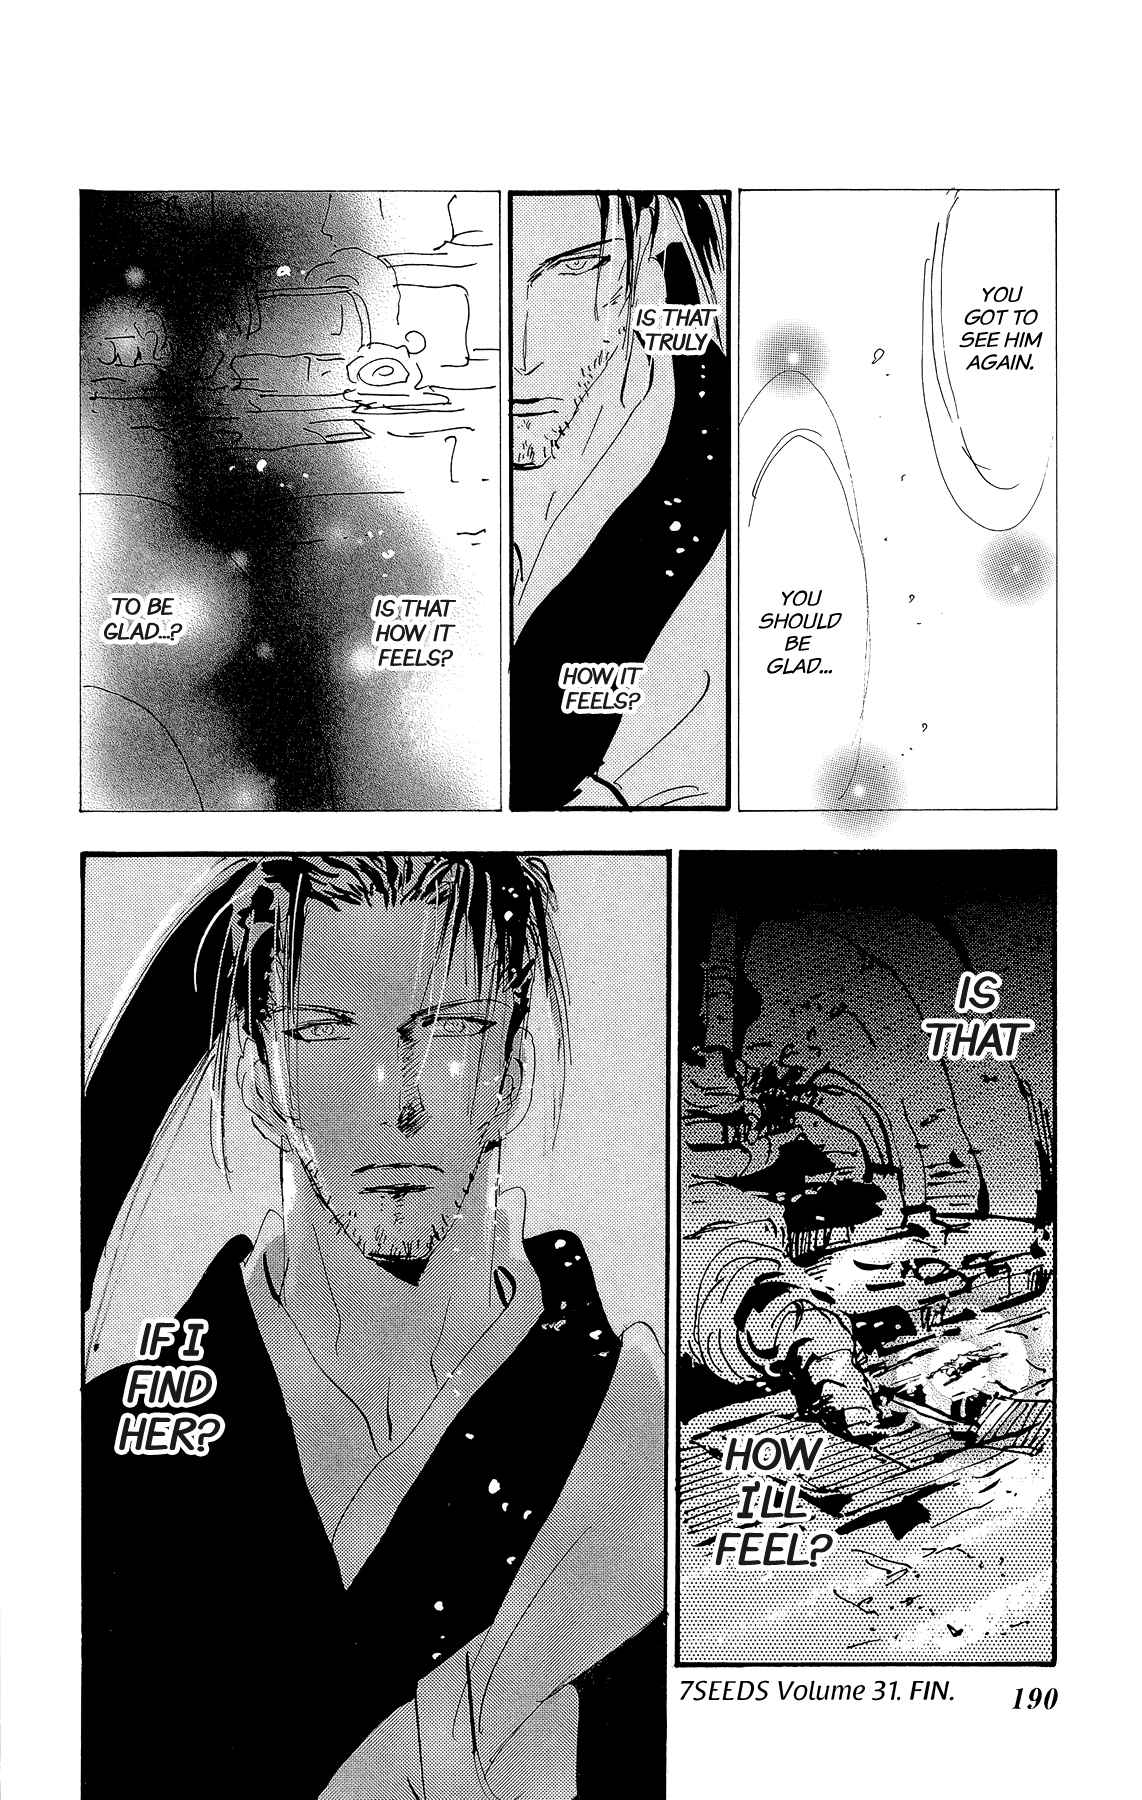 7 Seeds Vol. 31 Ch. 161 Mountains Chapter 26 [Judgment 2]